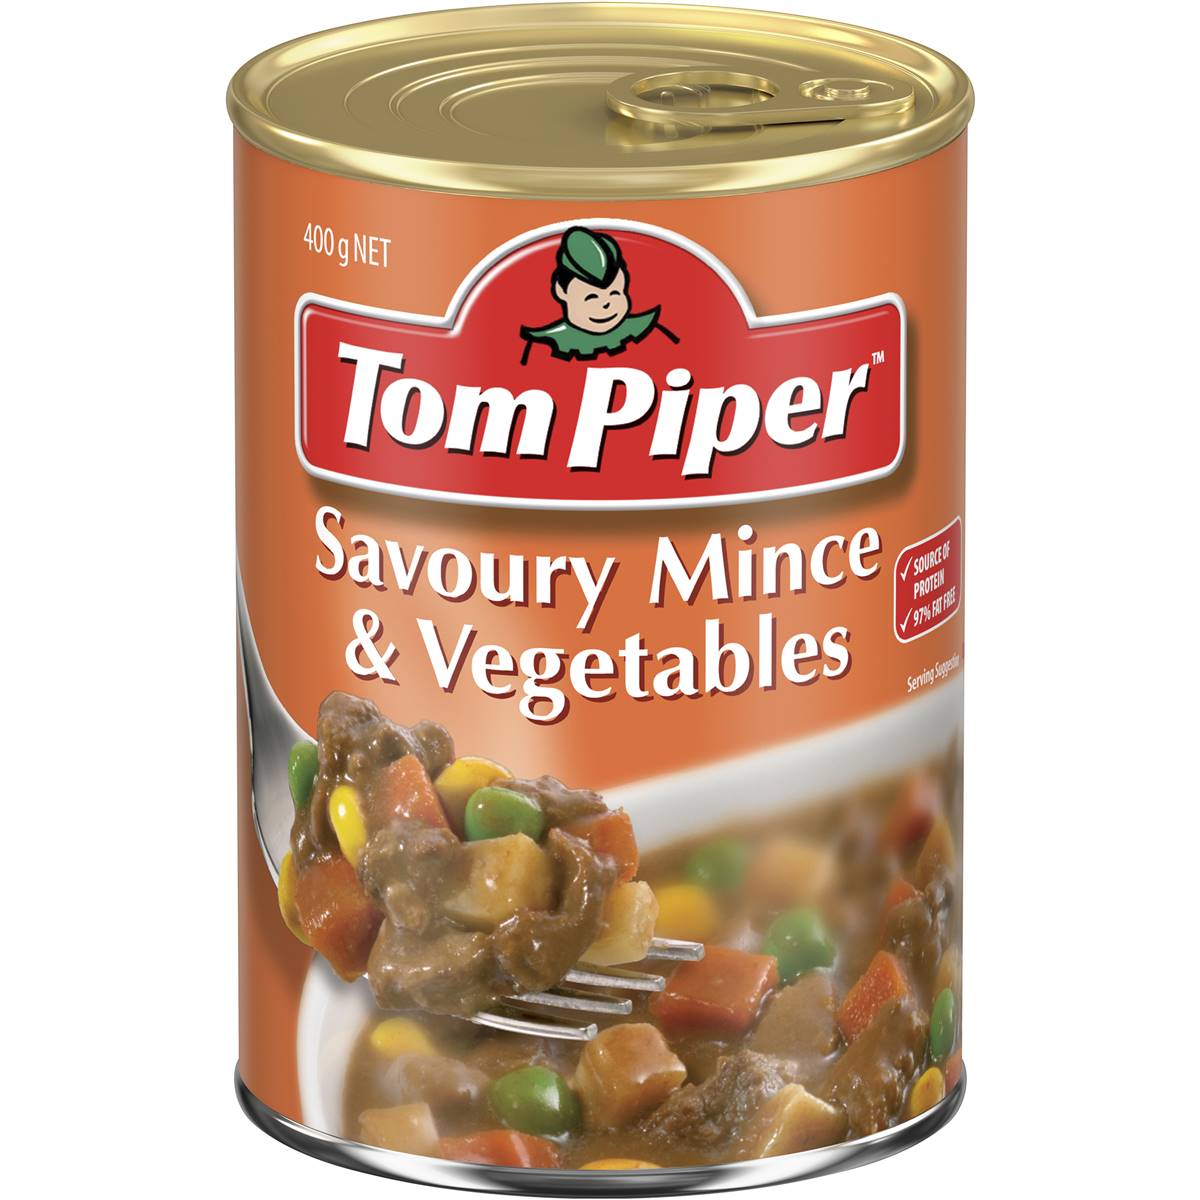 Calories in Tom Piper Savoury Mince & Vegetables Canned Meal